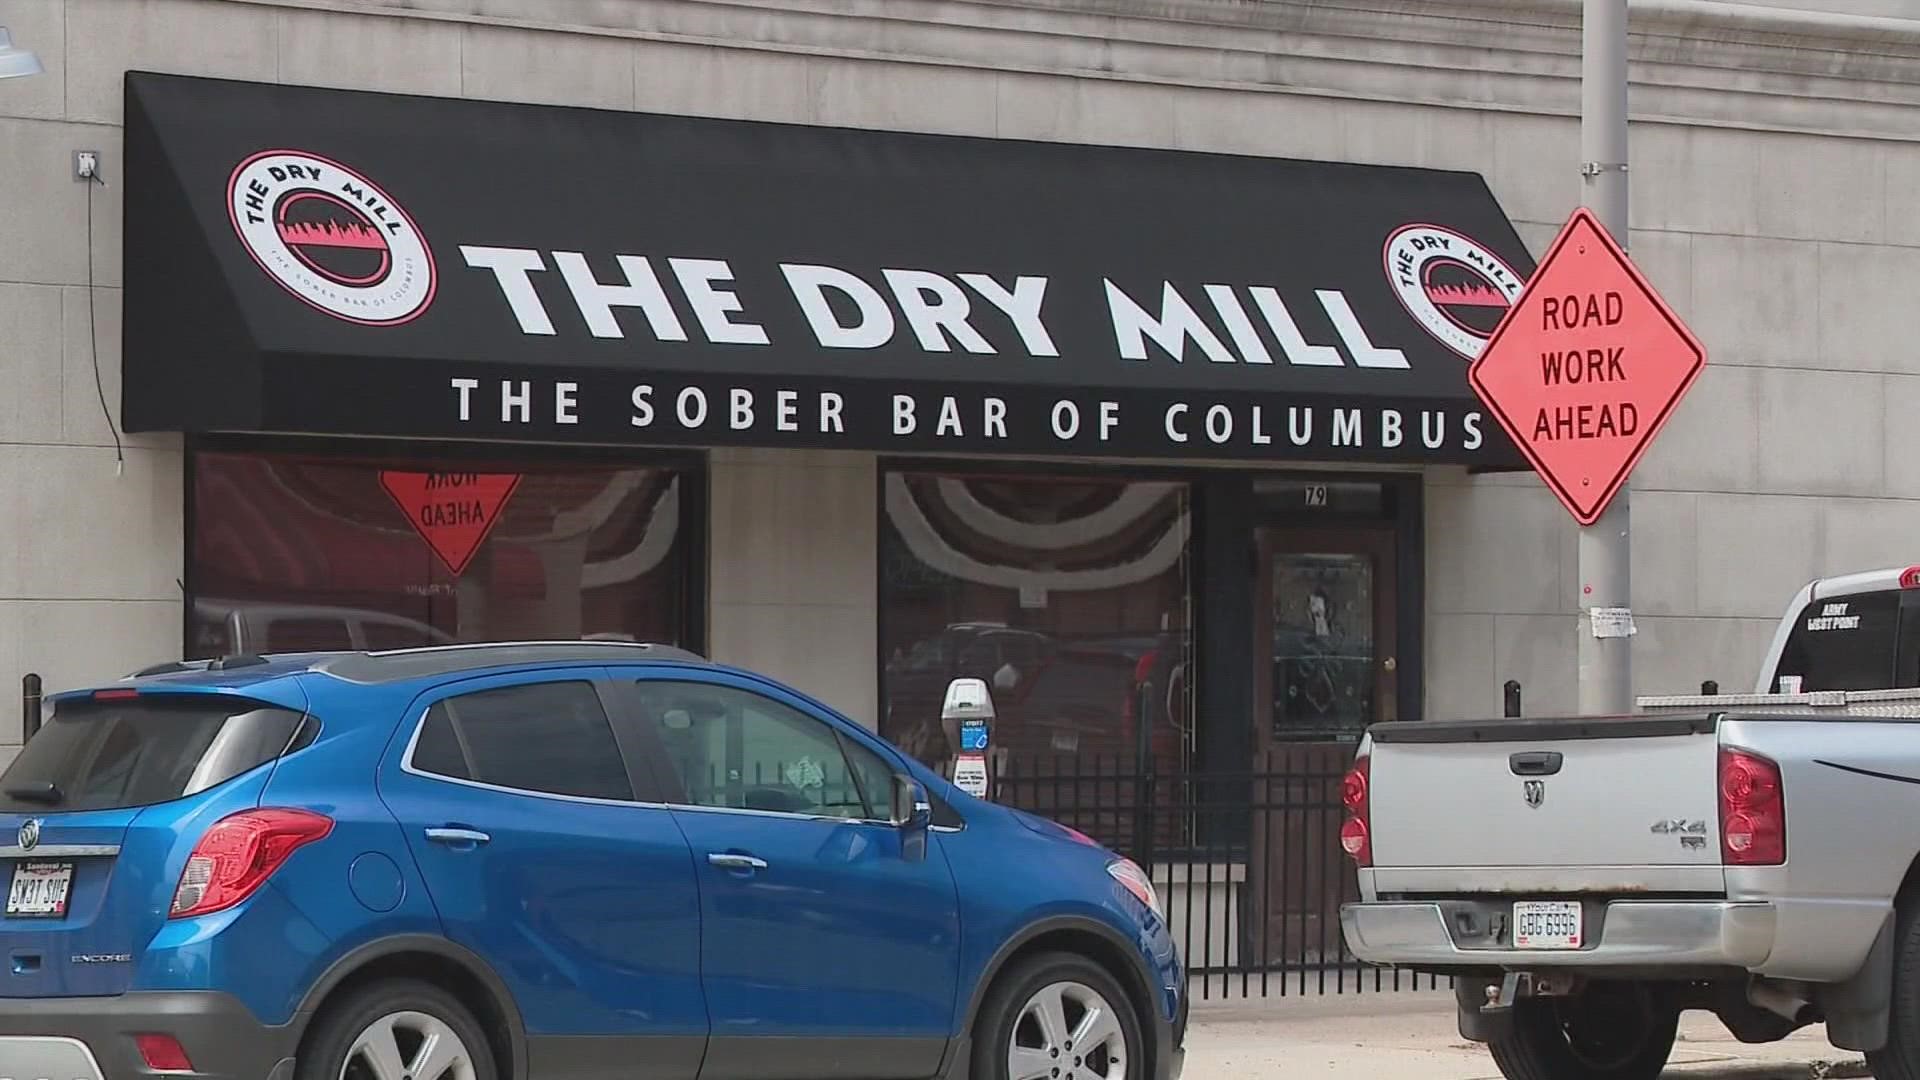 Owners of The Dry Mill posted to Facebook, saying that sales have declined over the past few months, leading to the closure of the business.